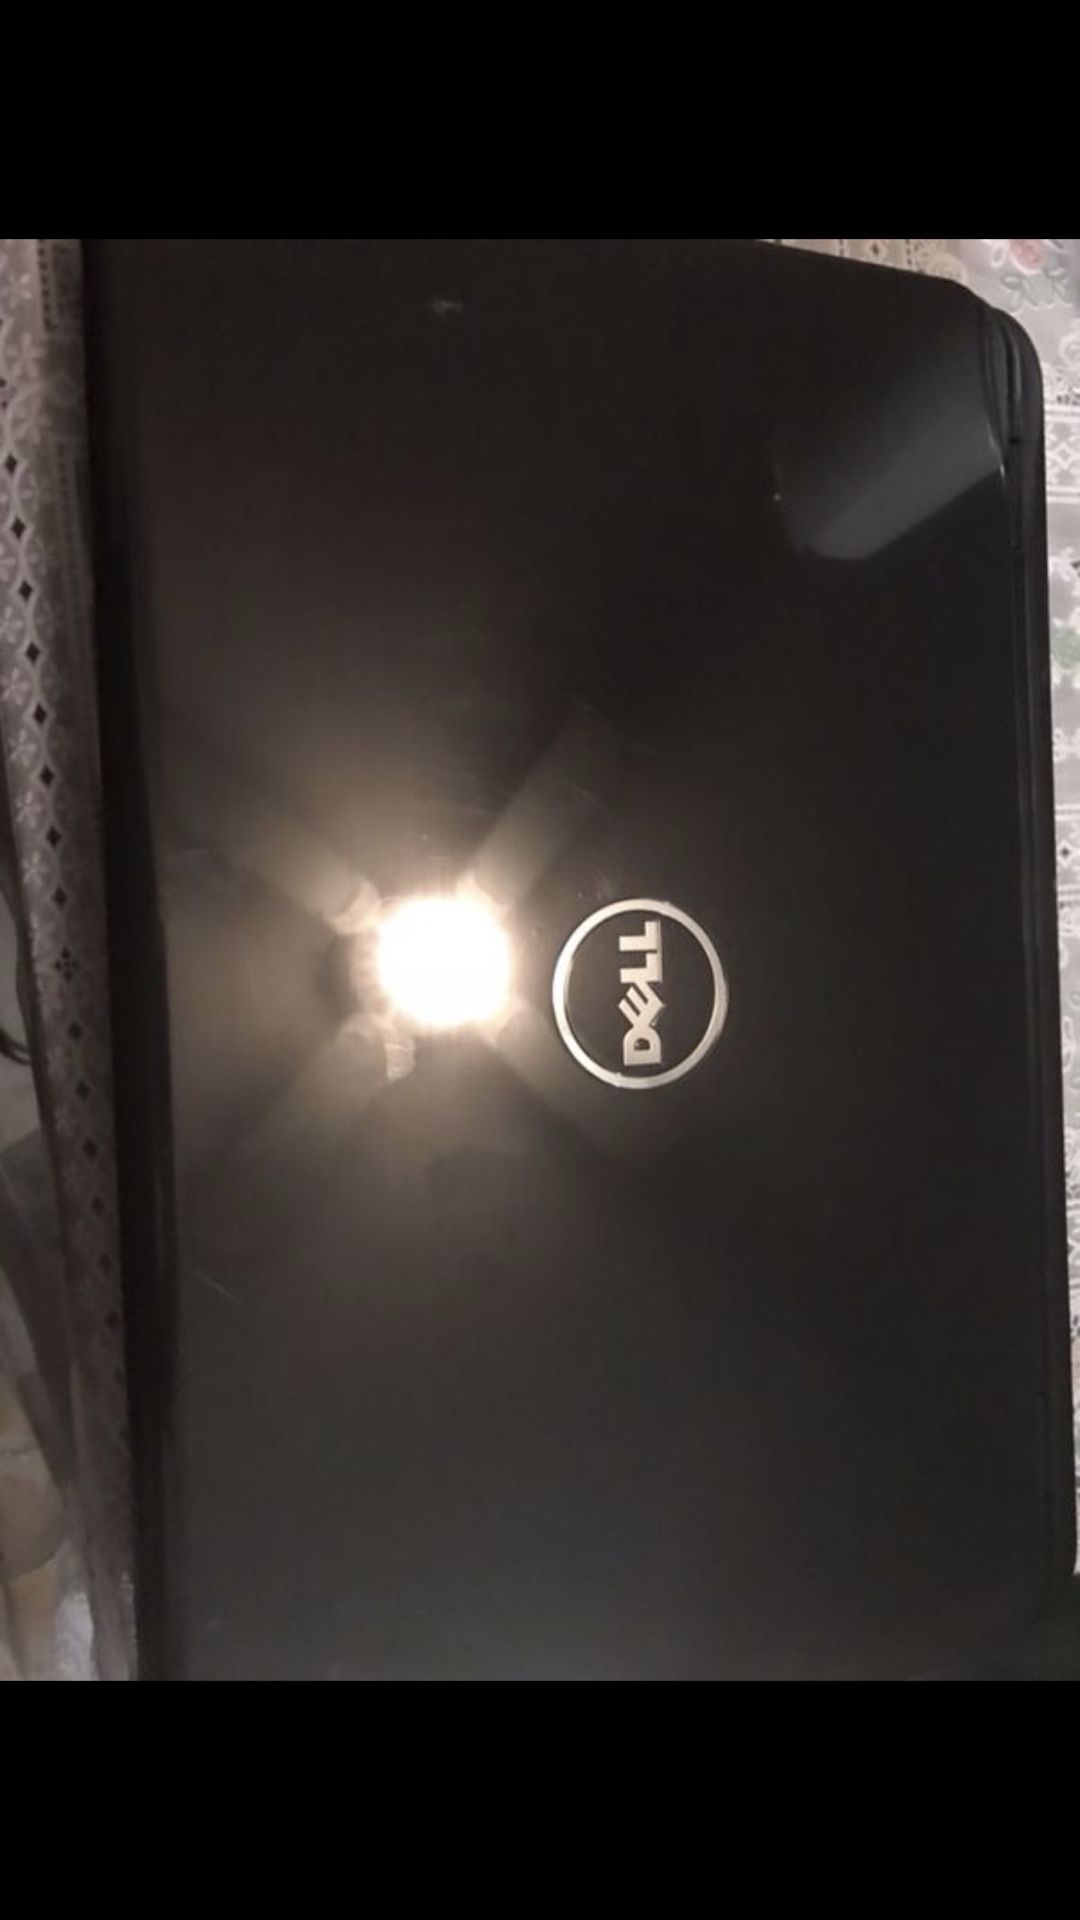 Dell Inspiron n5110!